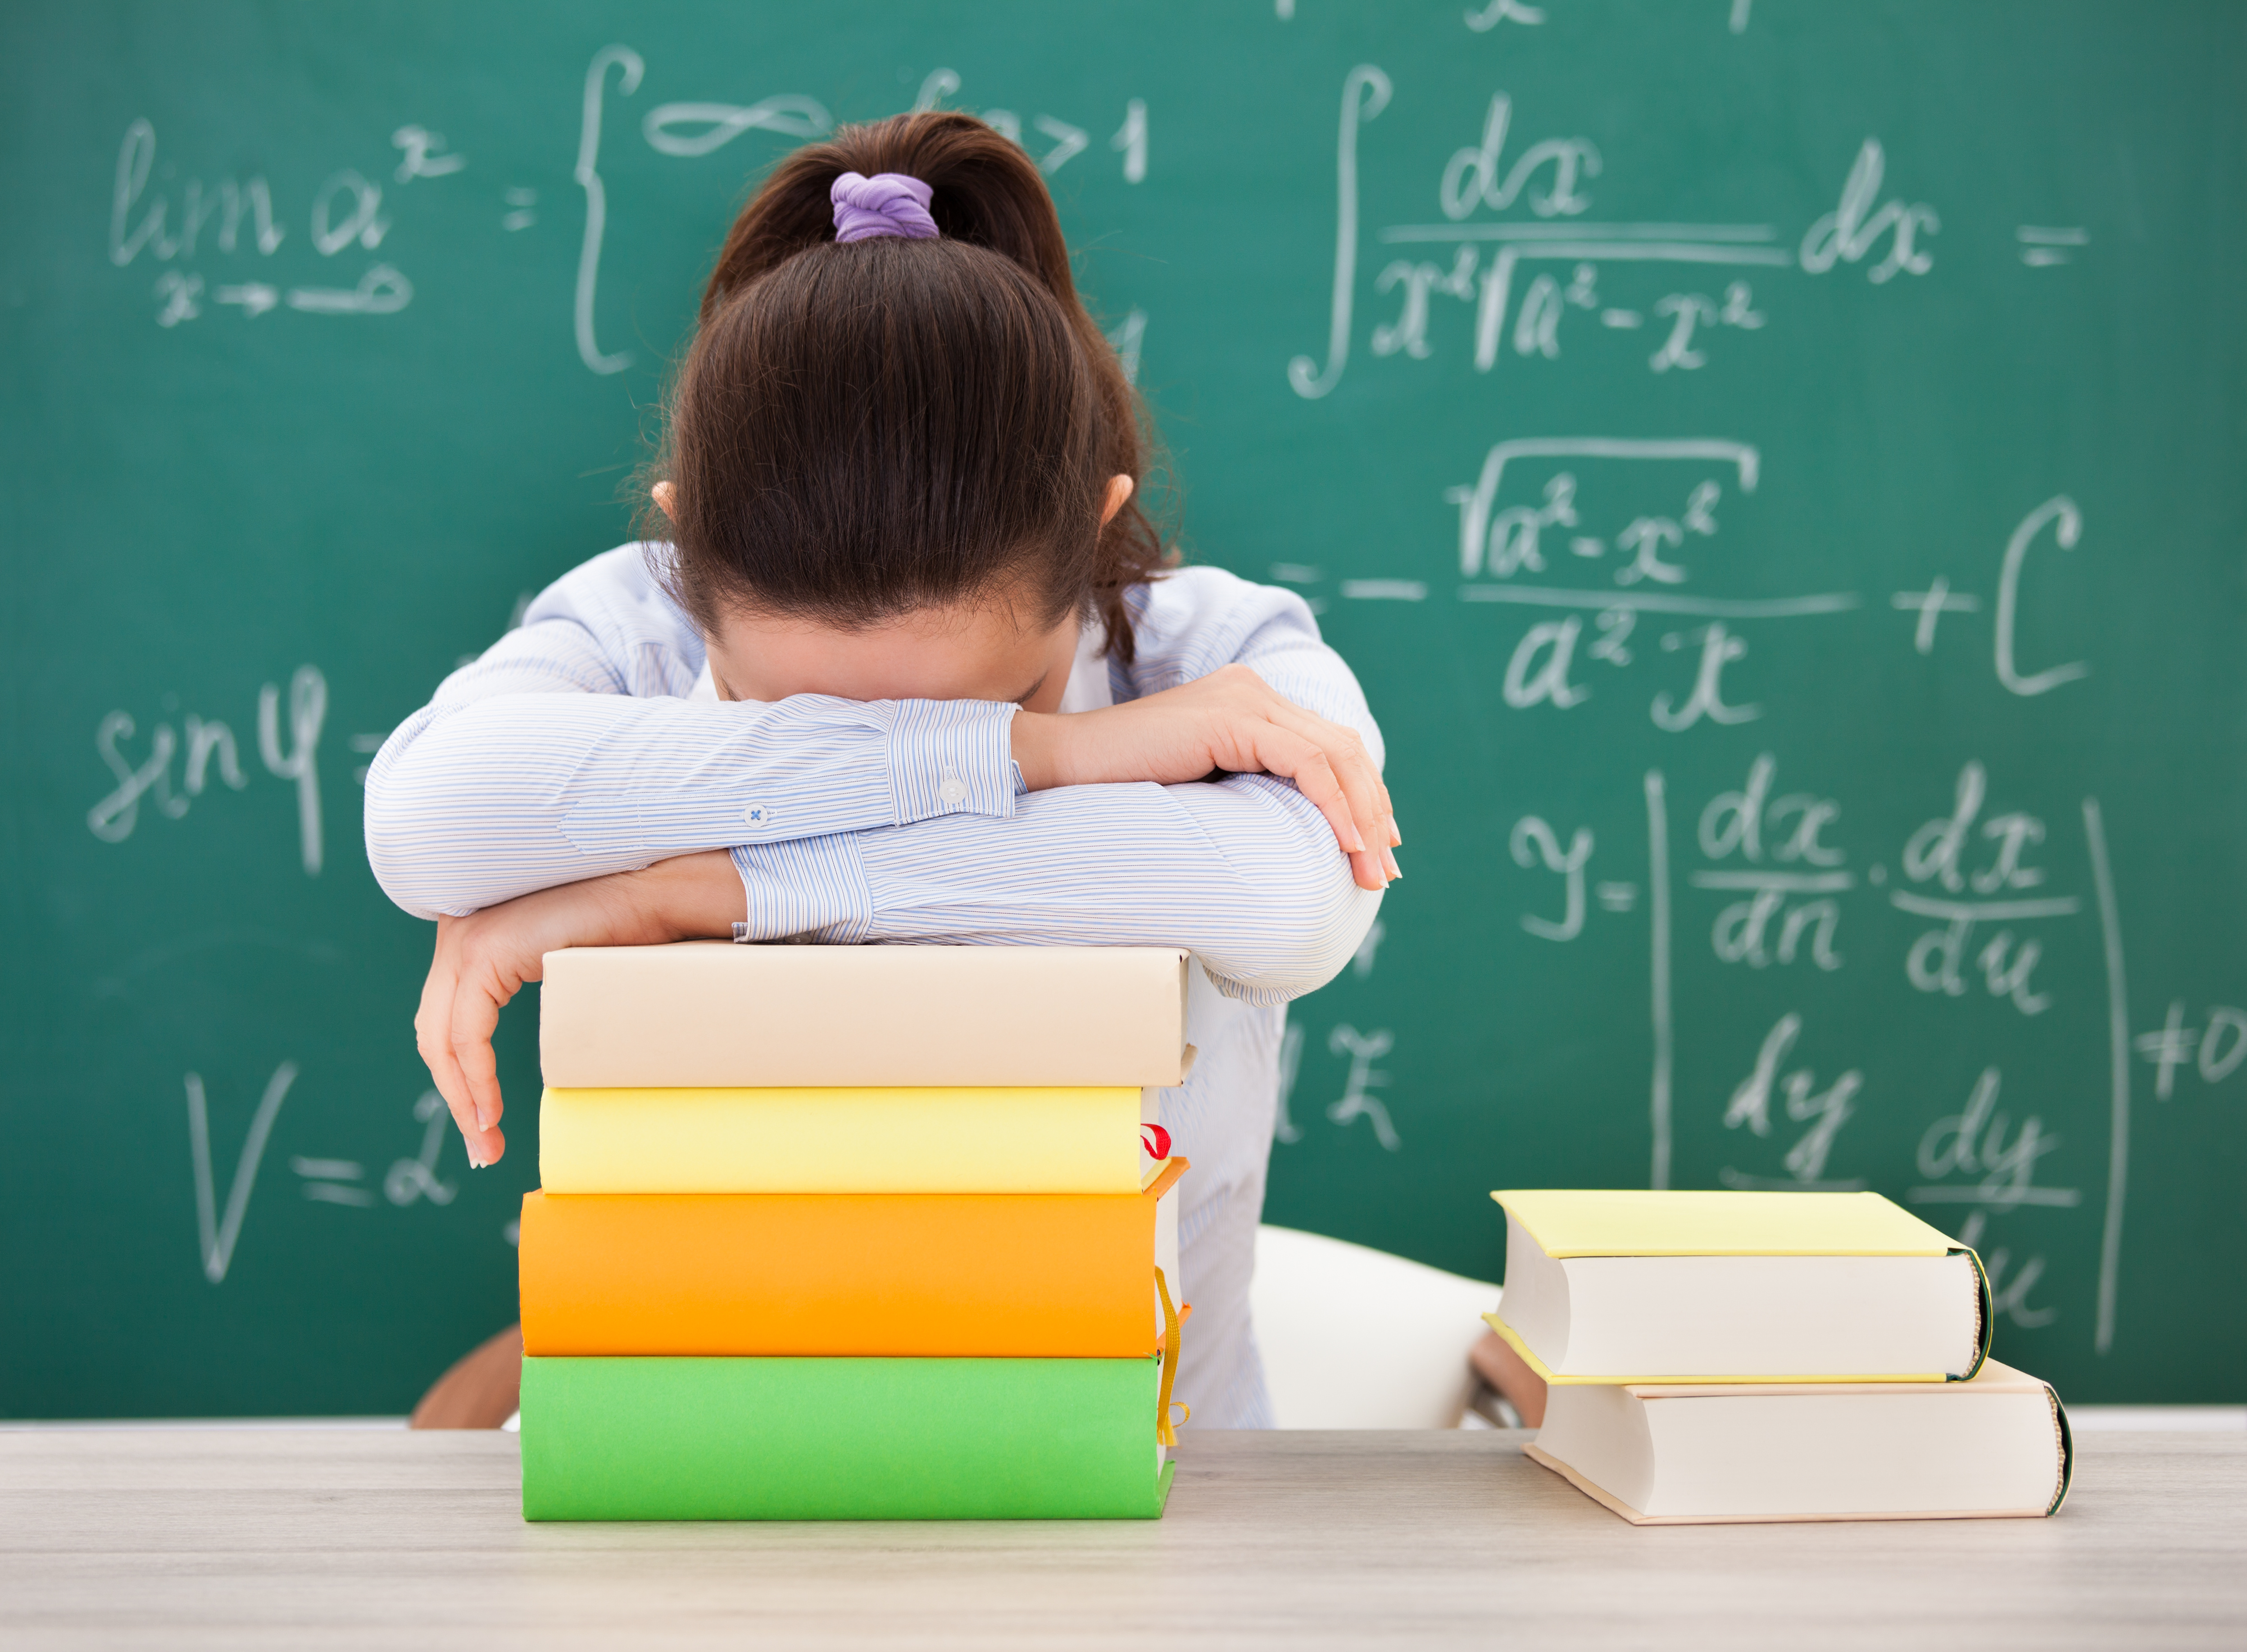 problem solving and mathematics anxiety